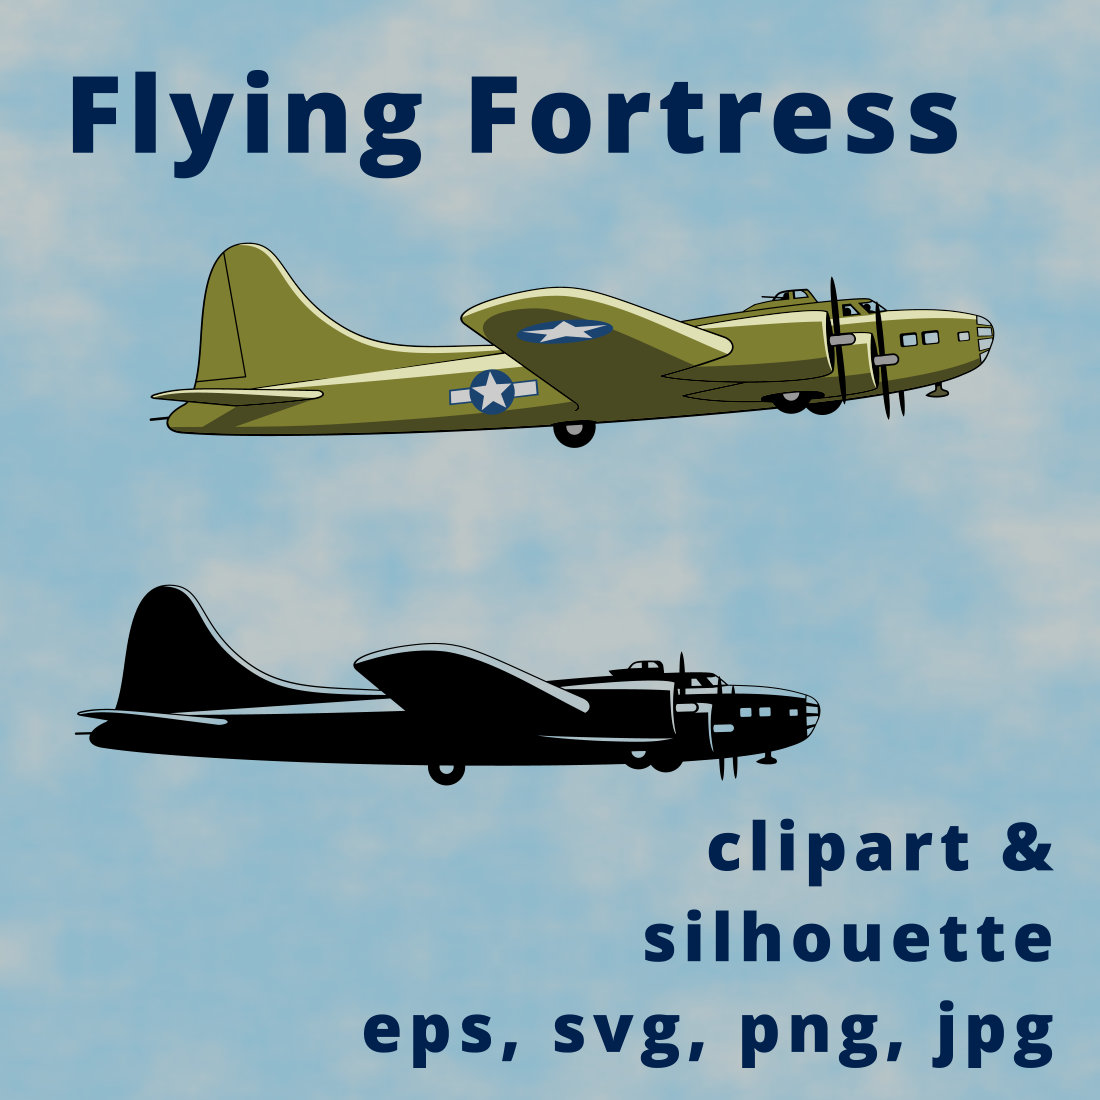 B-17 Flying Fortress USA Heavy Bomber Clipart cover image.